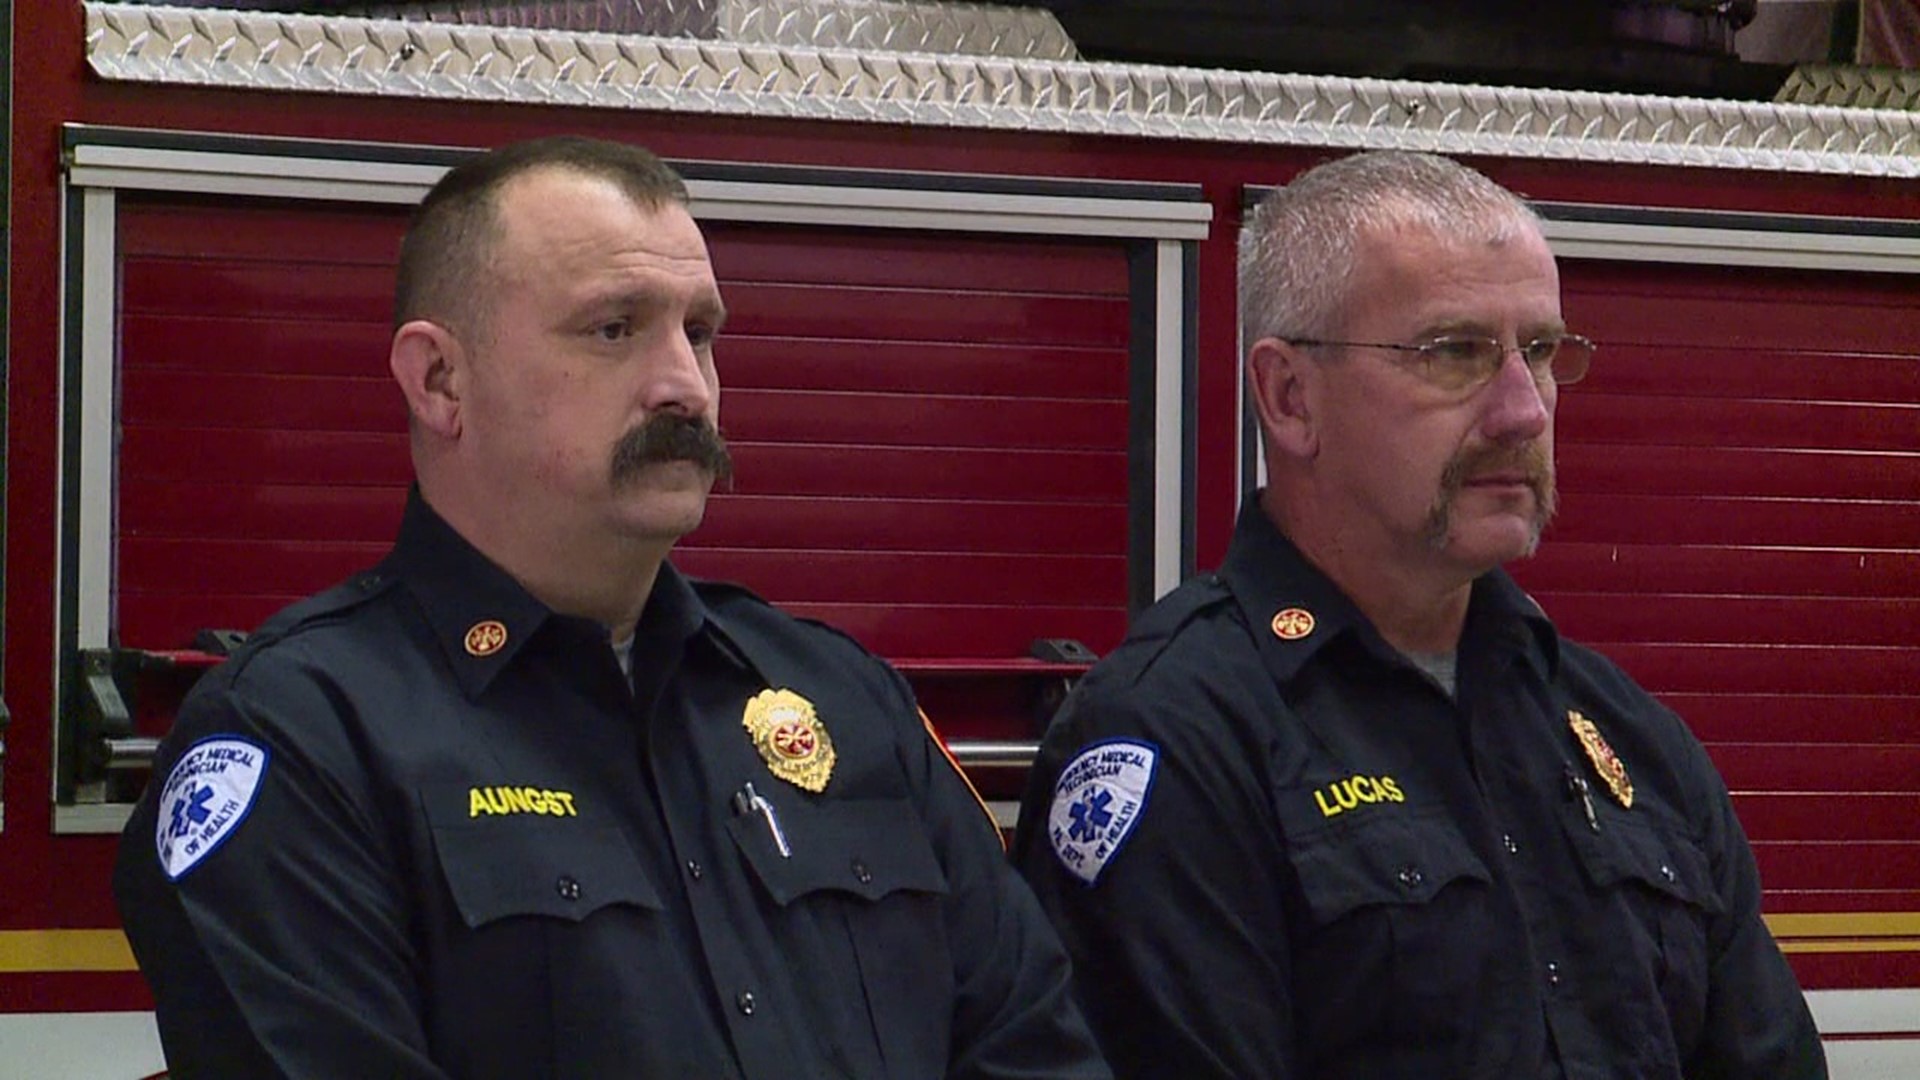 Sam Aungst and Keith Lucas will assume the highest leadership roles at the Williamsport Bureau of Fire.